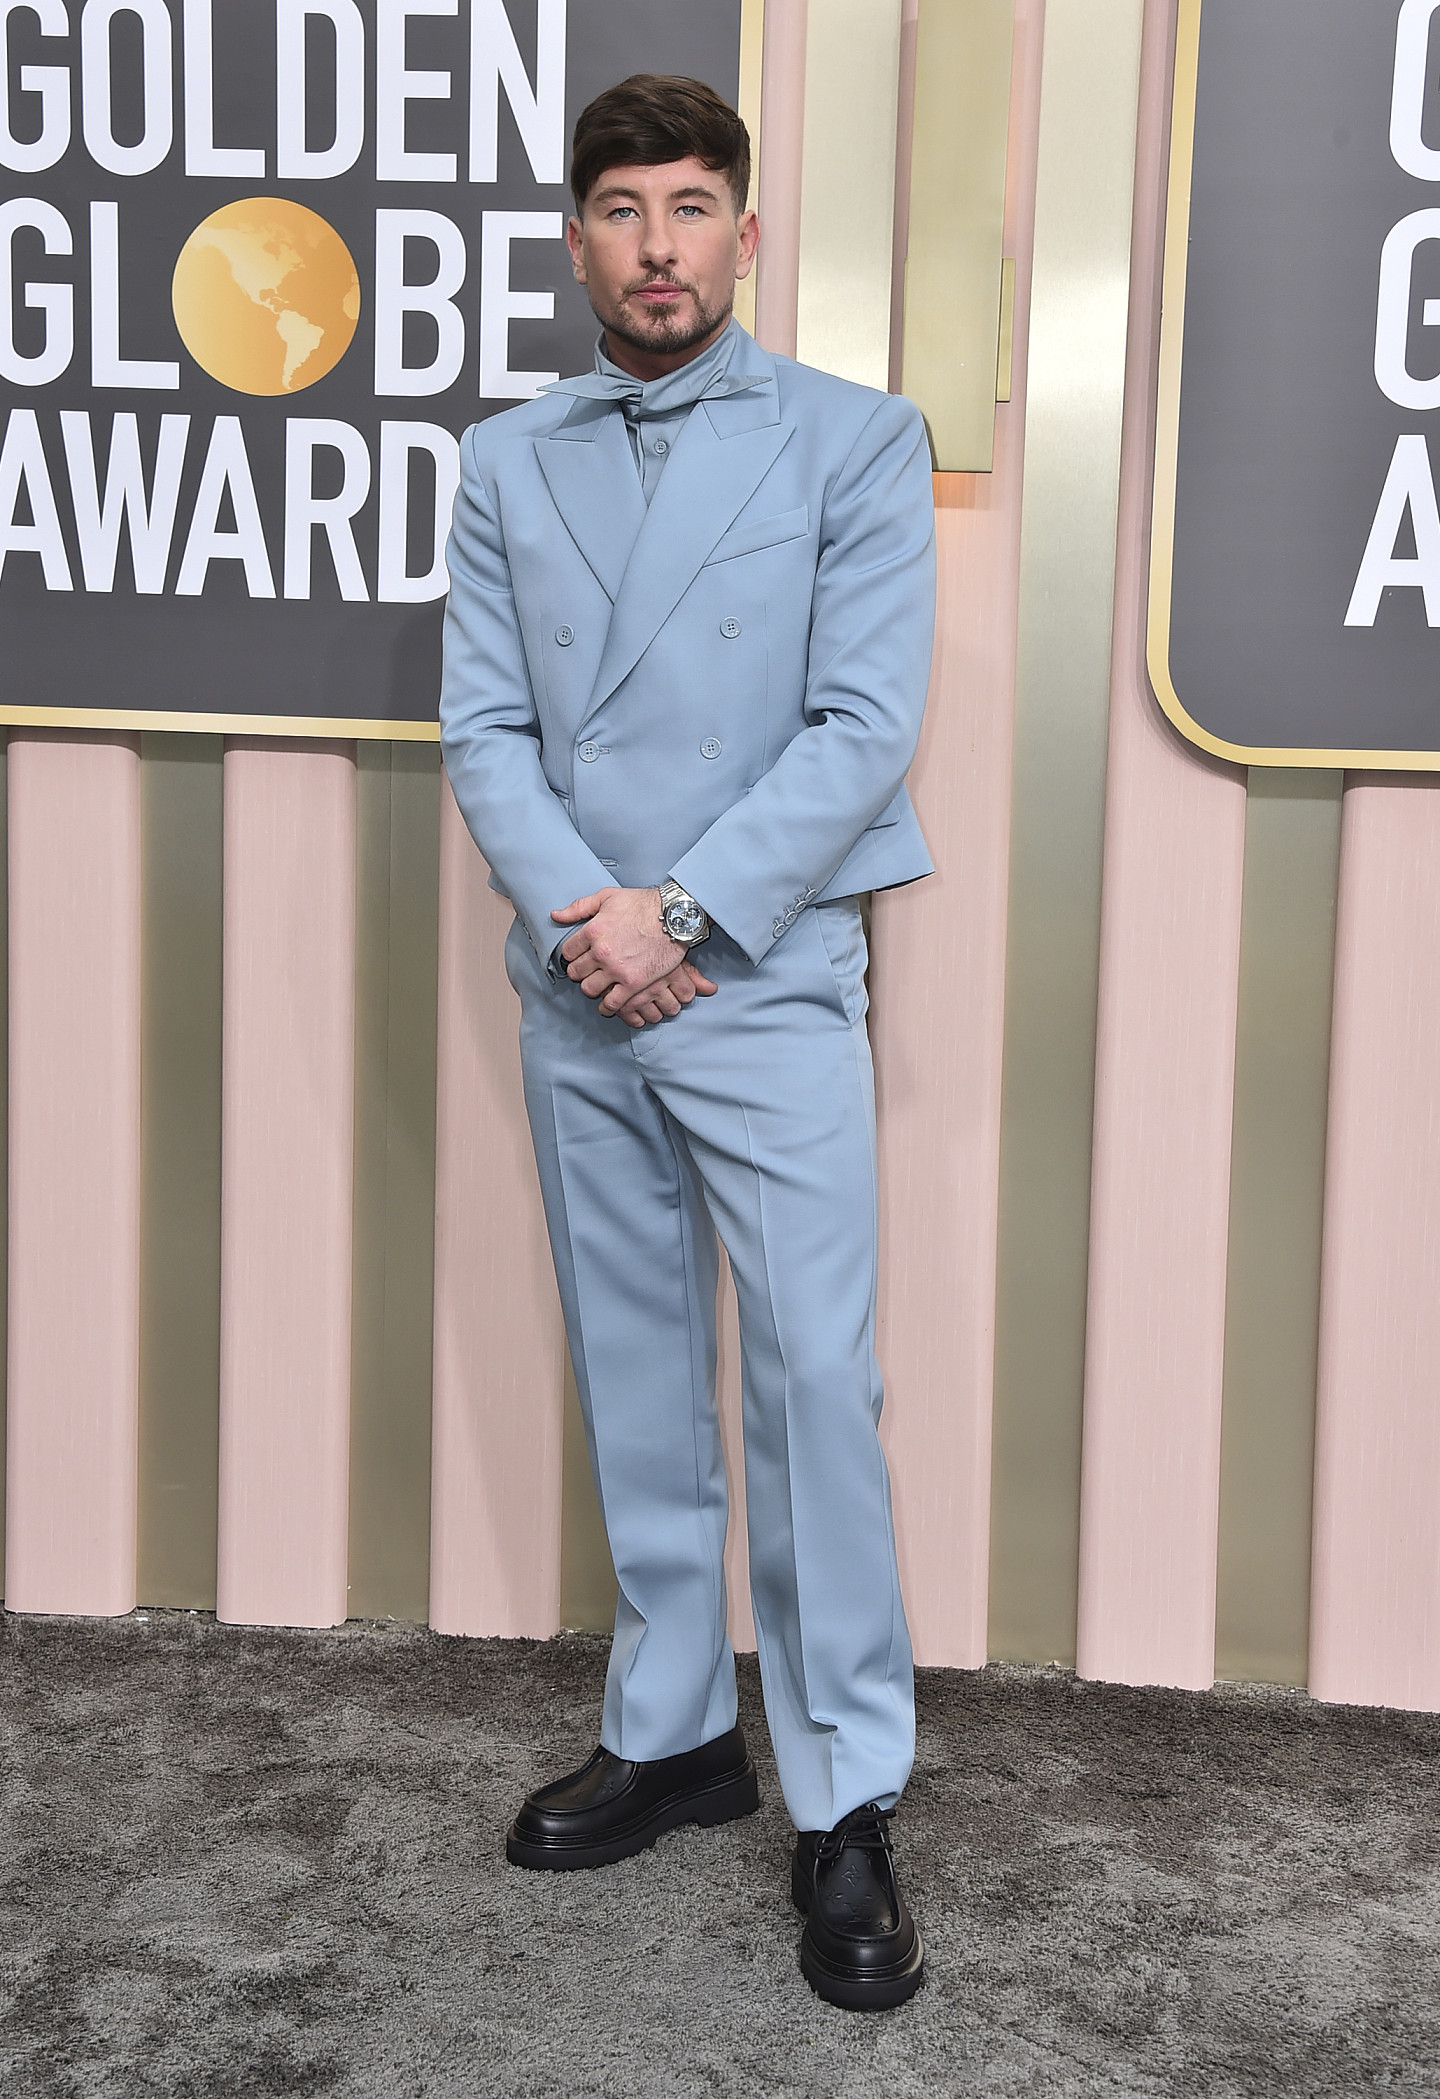 Barry Keoghan wearing a light blue suit over the top of a shirt in the exact same shade of blue. 